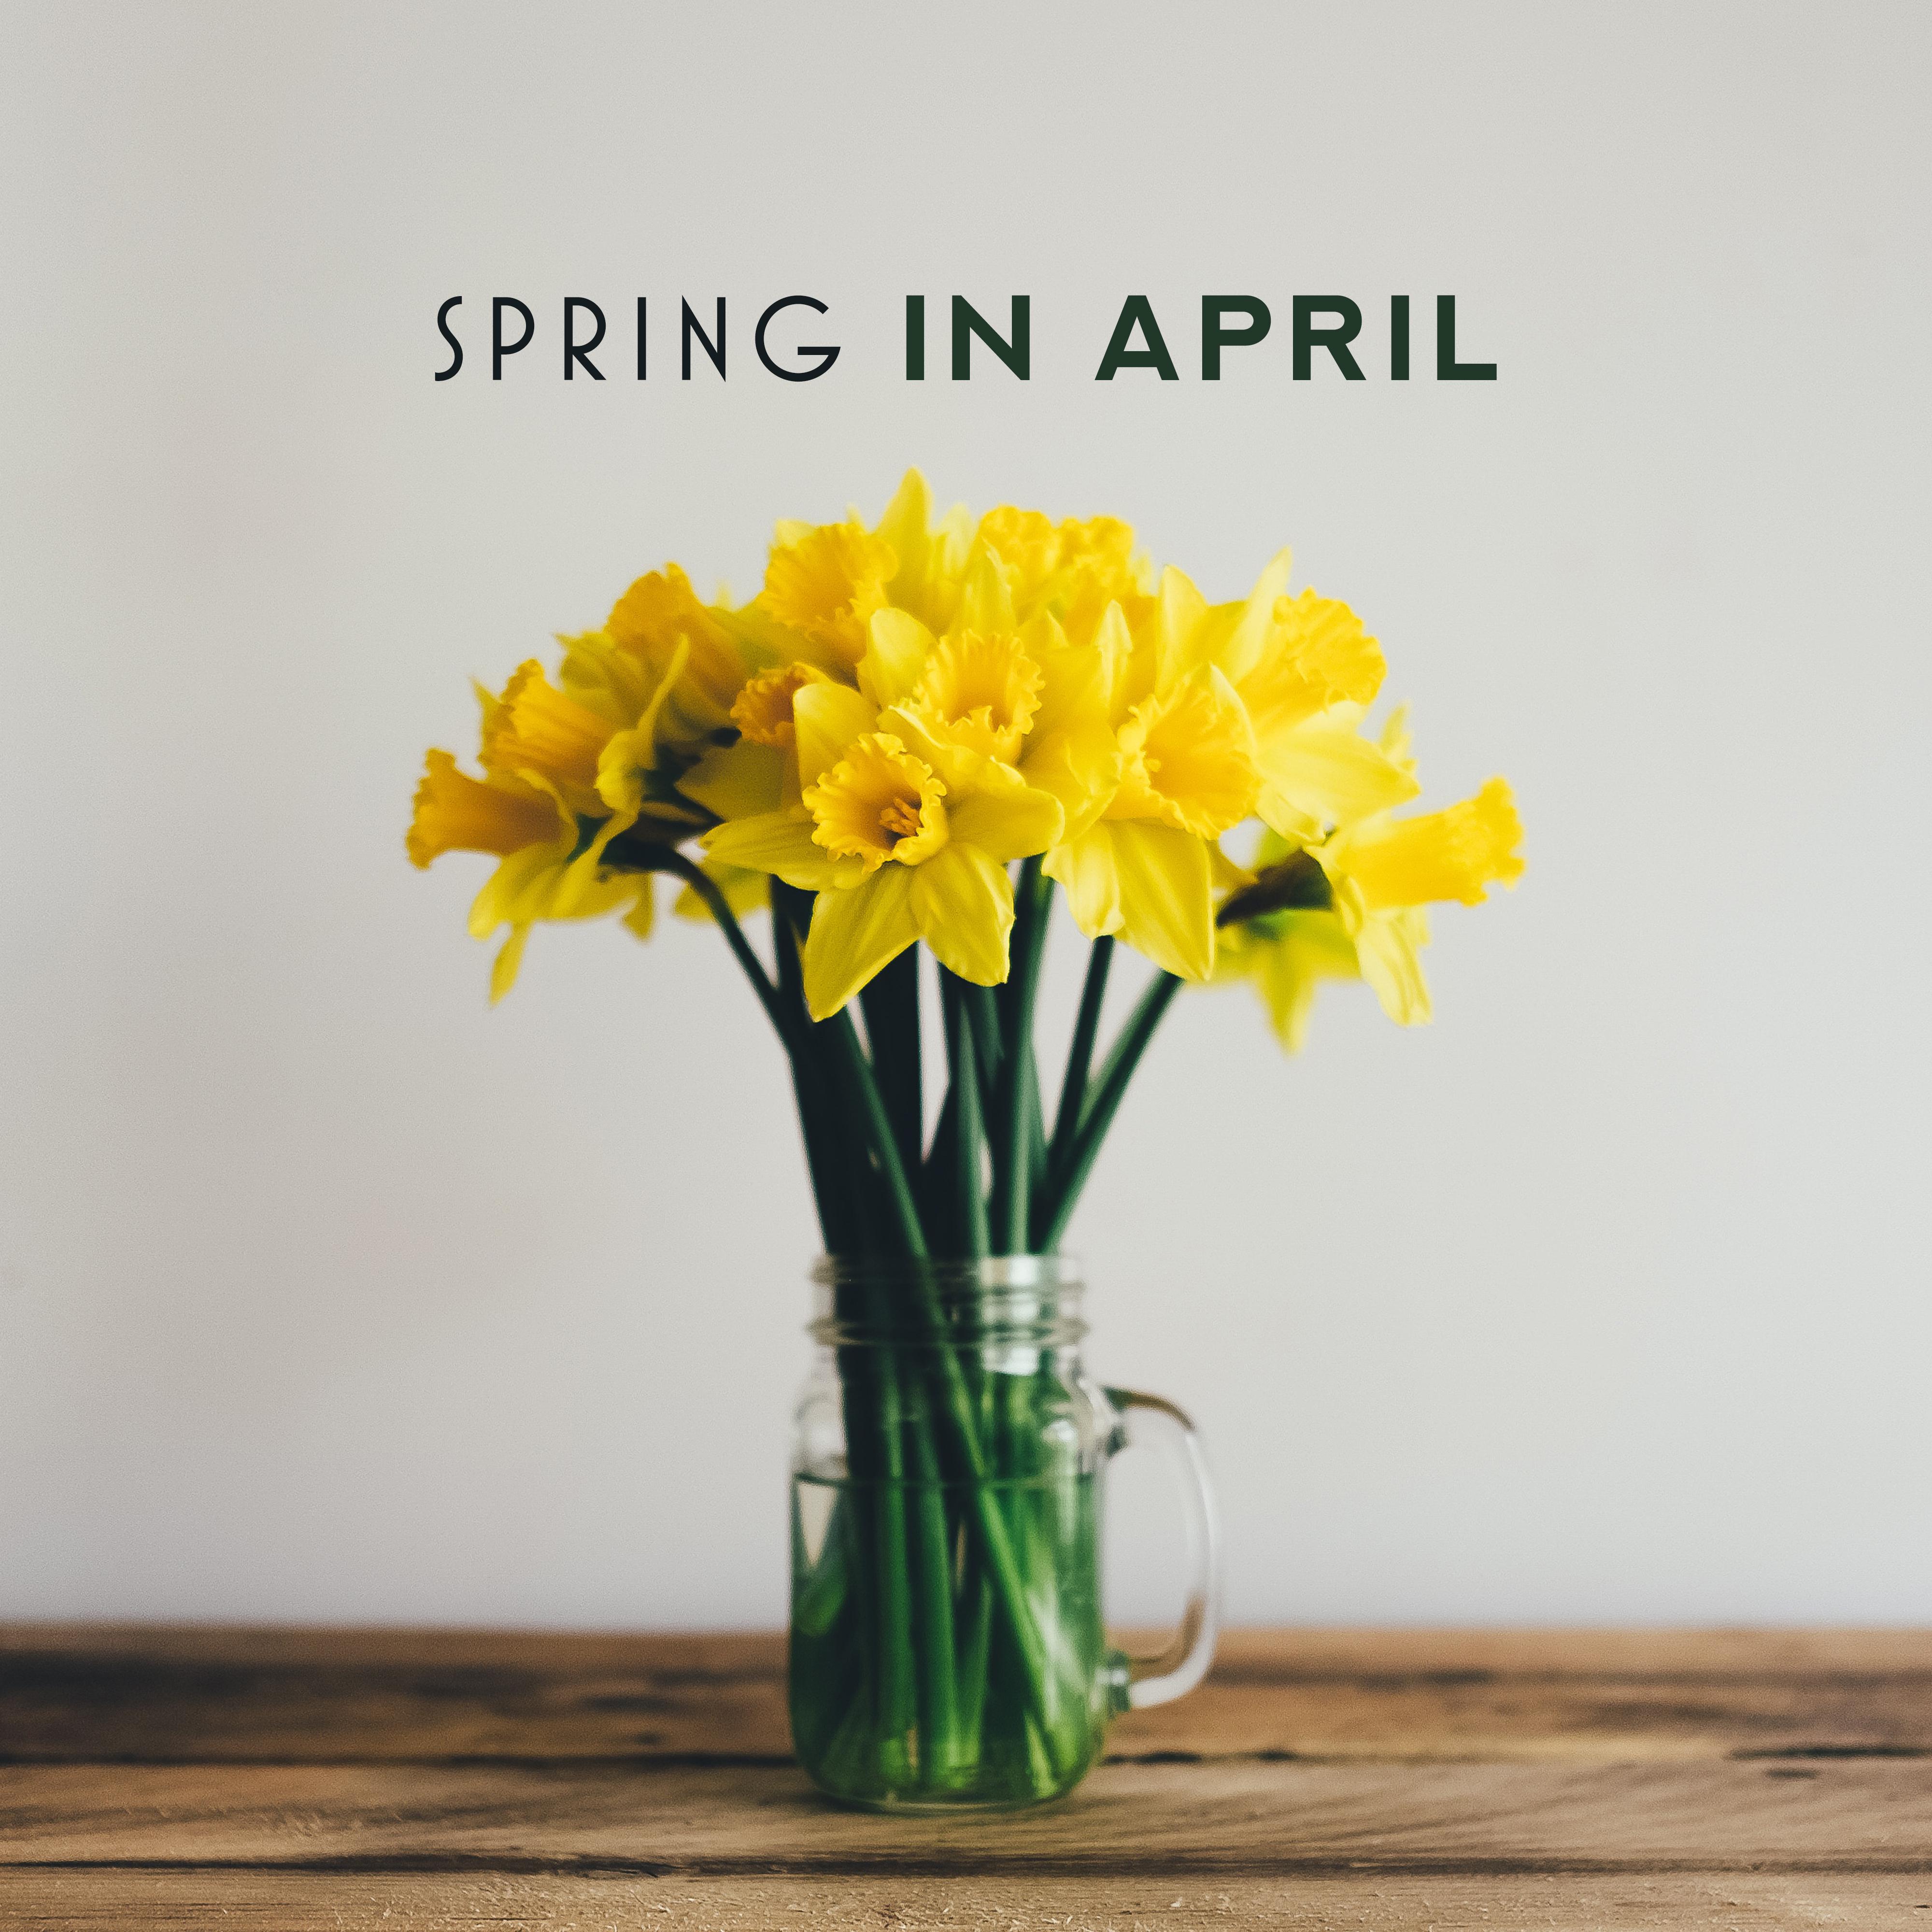 Spring in April – Jazz Relaxation 2019, Deep Relax, Smooth Jazz to Rest, Sleep, Meditation